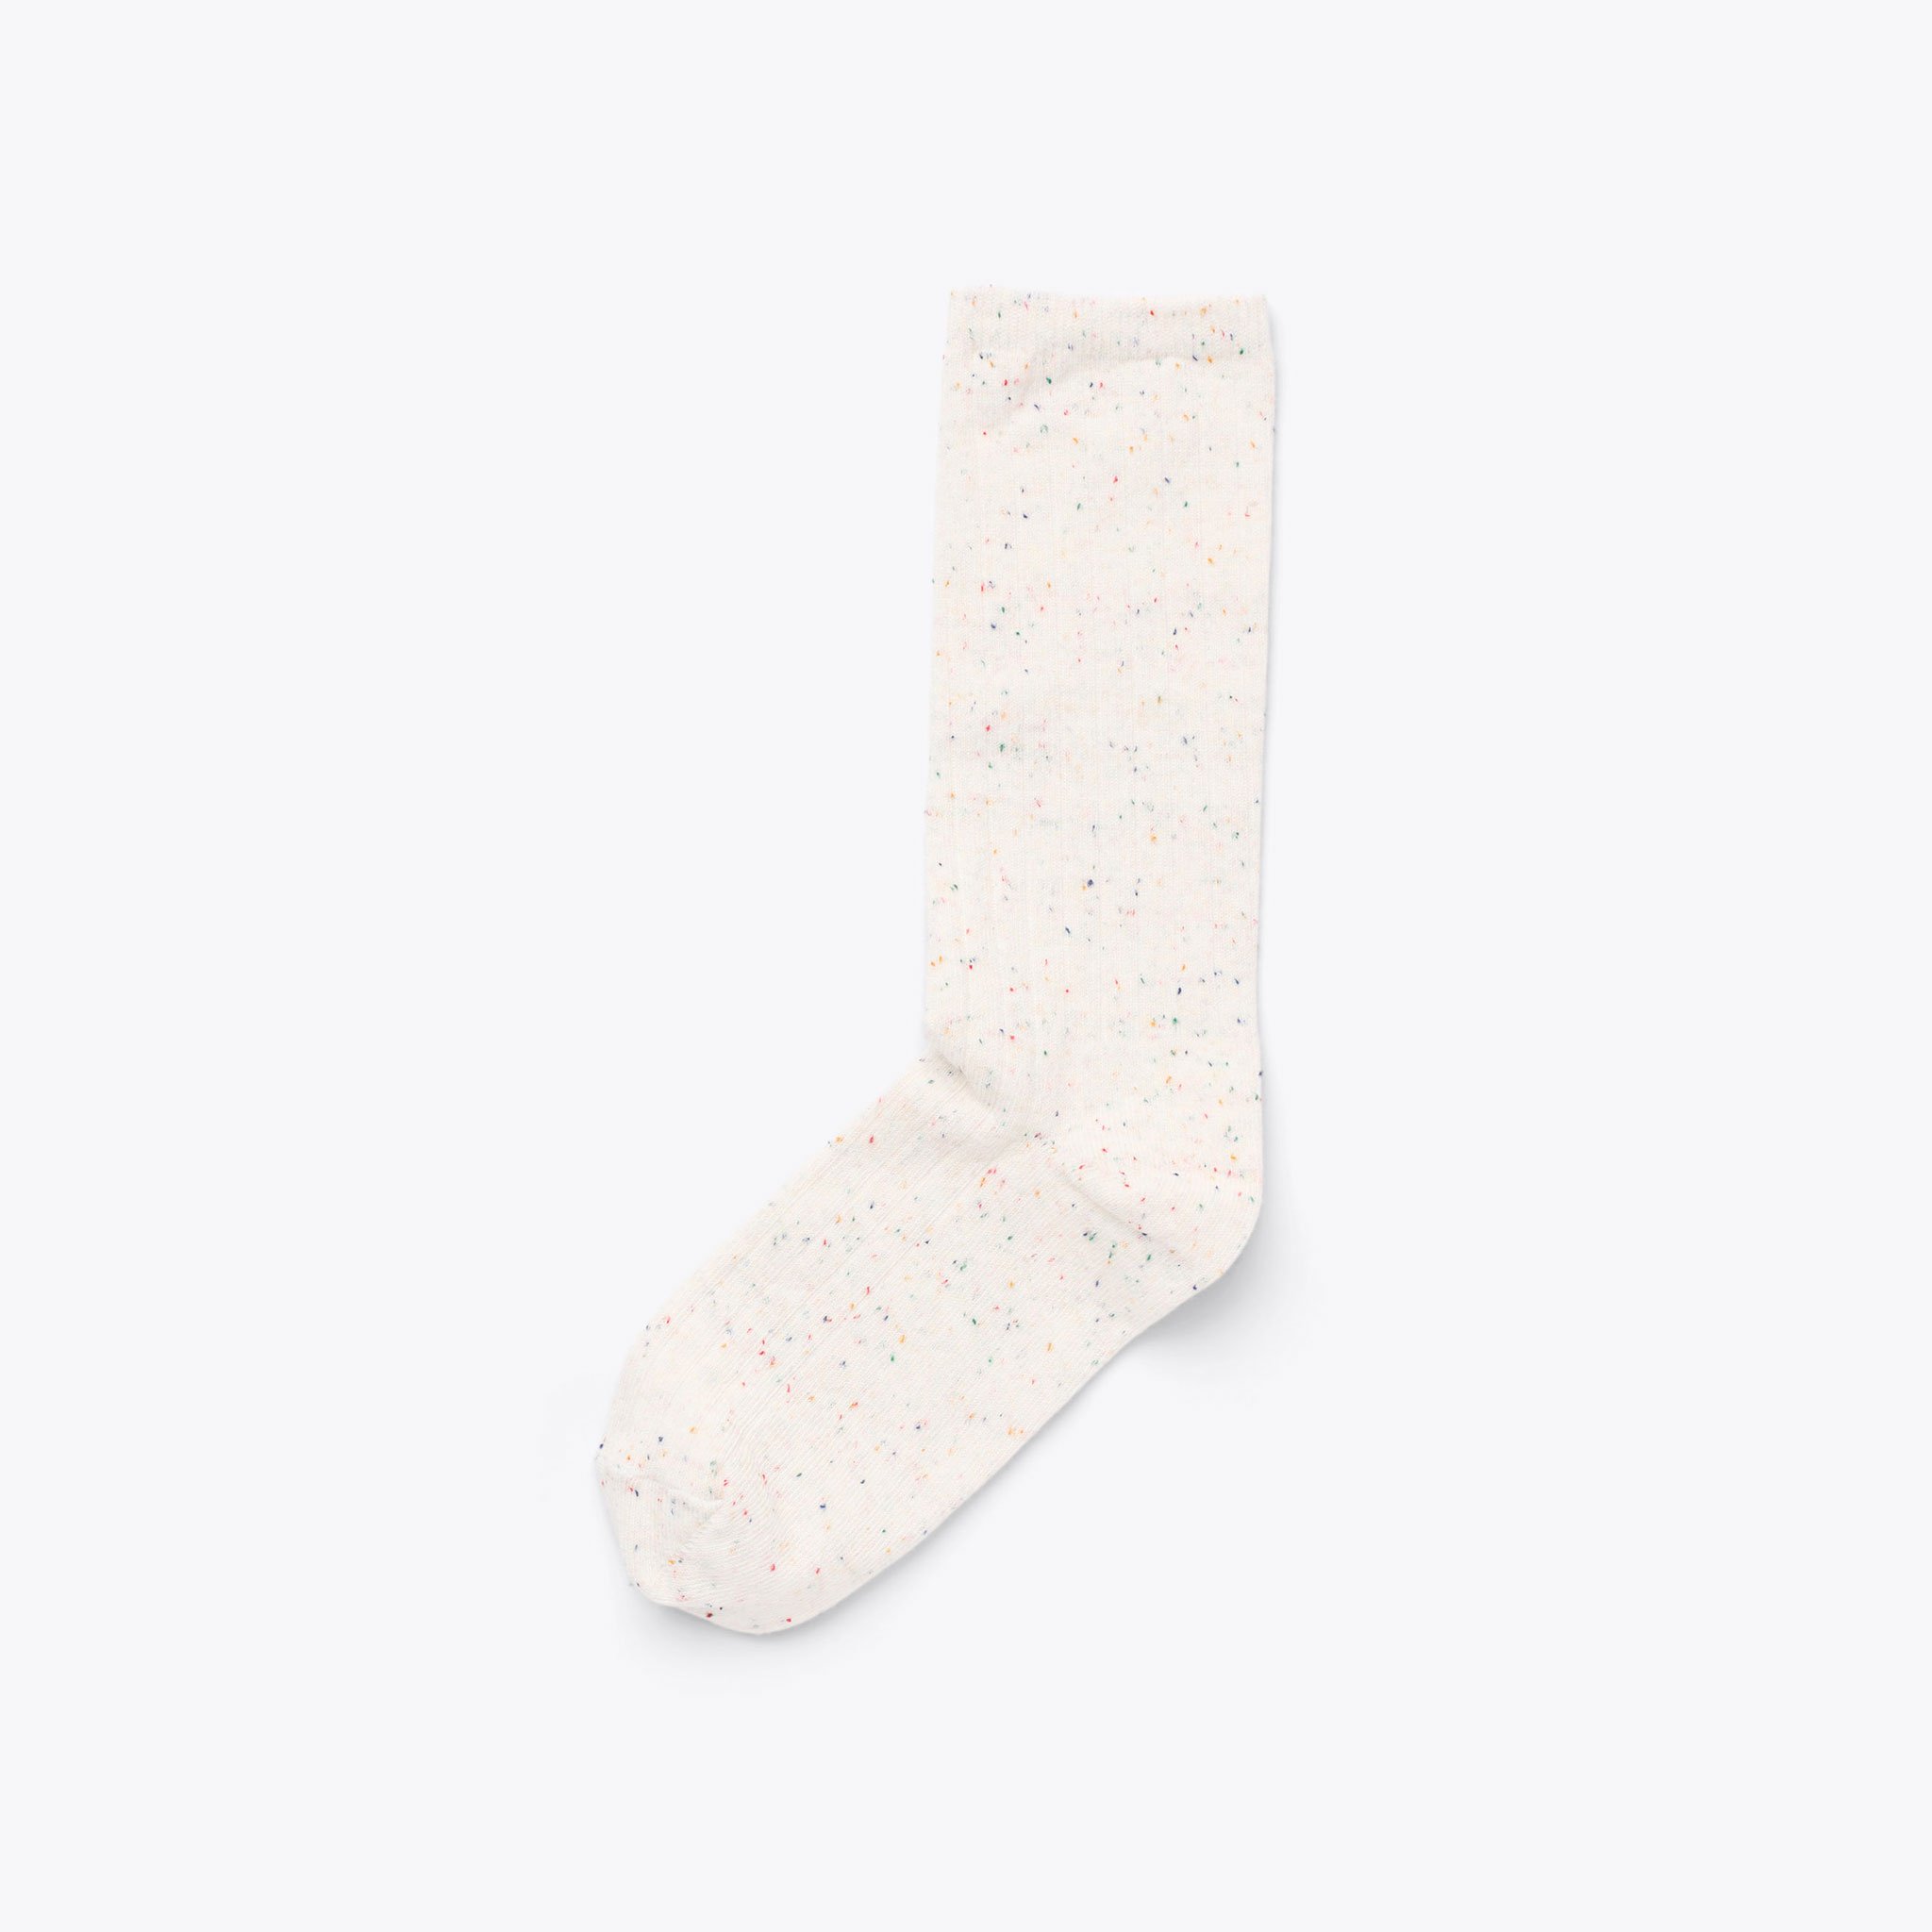 Nisolo Cotton Crew Sock Ivory Multicolor Marl - Every Nisolo product is built on the foundation of comfort, function, and design. 